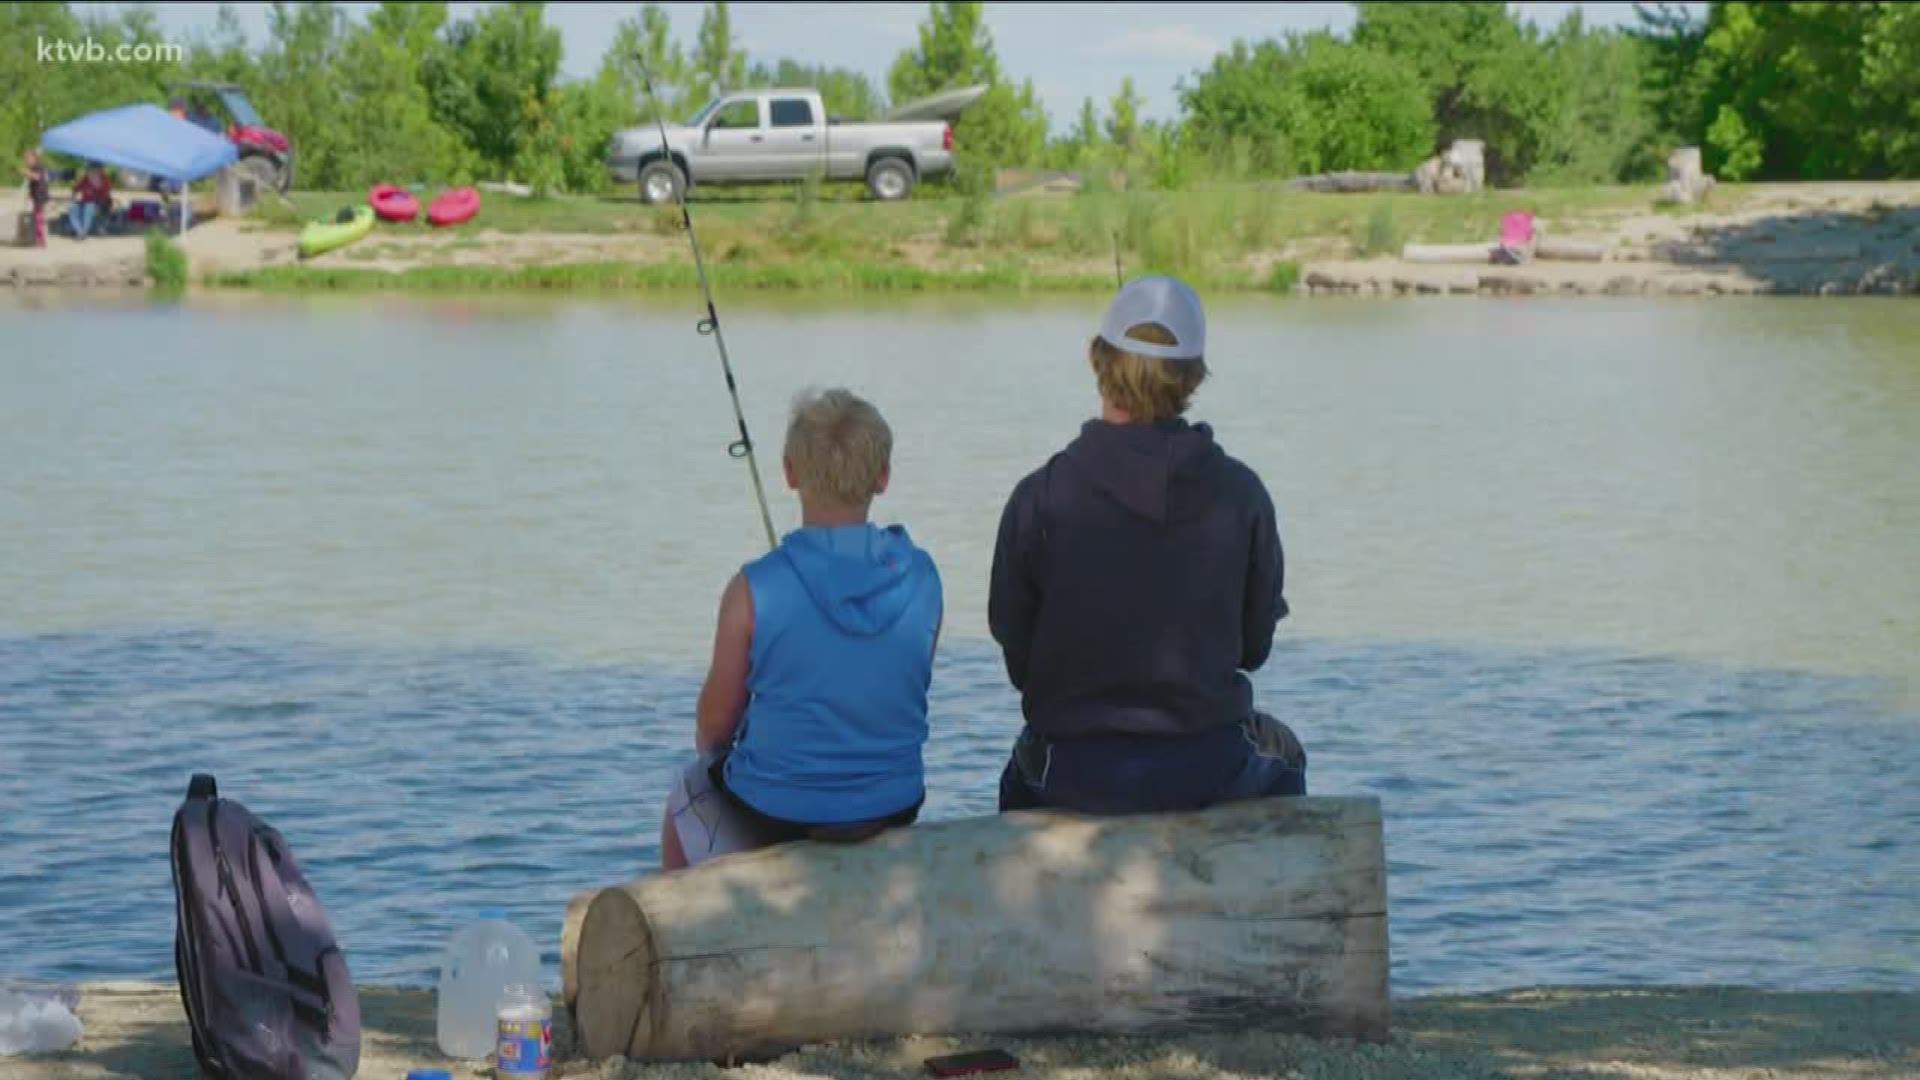 There are more than a half-million acres of water in Idaho. But a little pond outside of Parma has hooked the interest of anglers around the area and the world.